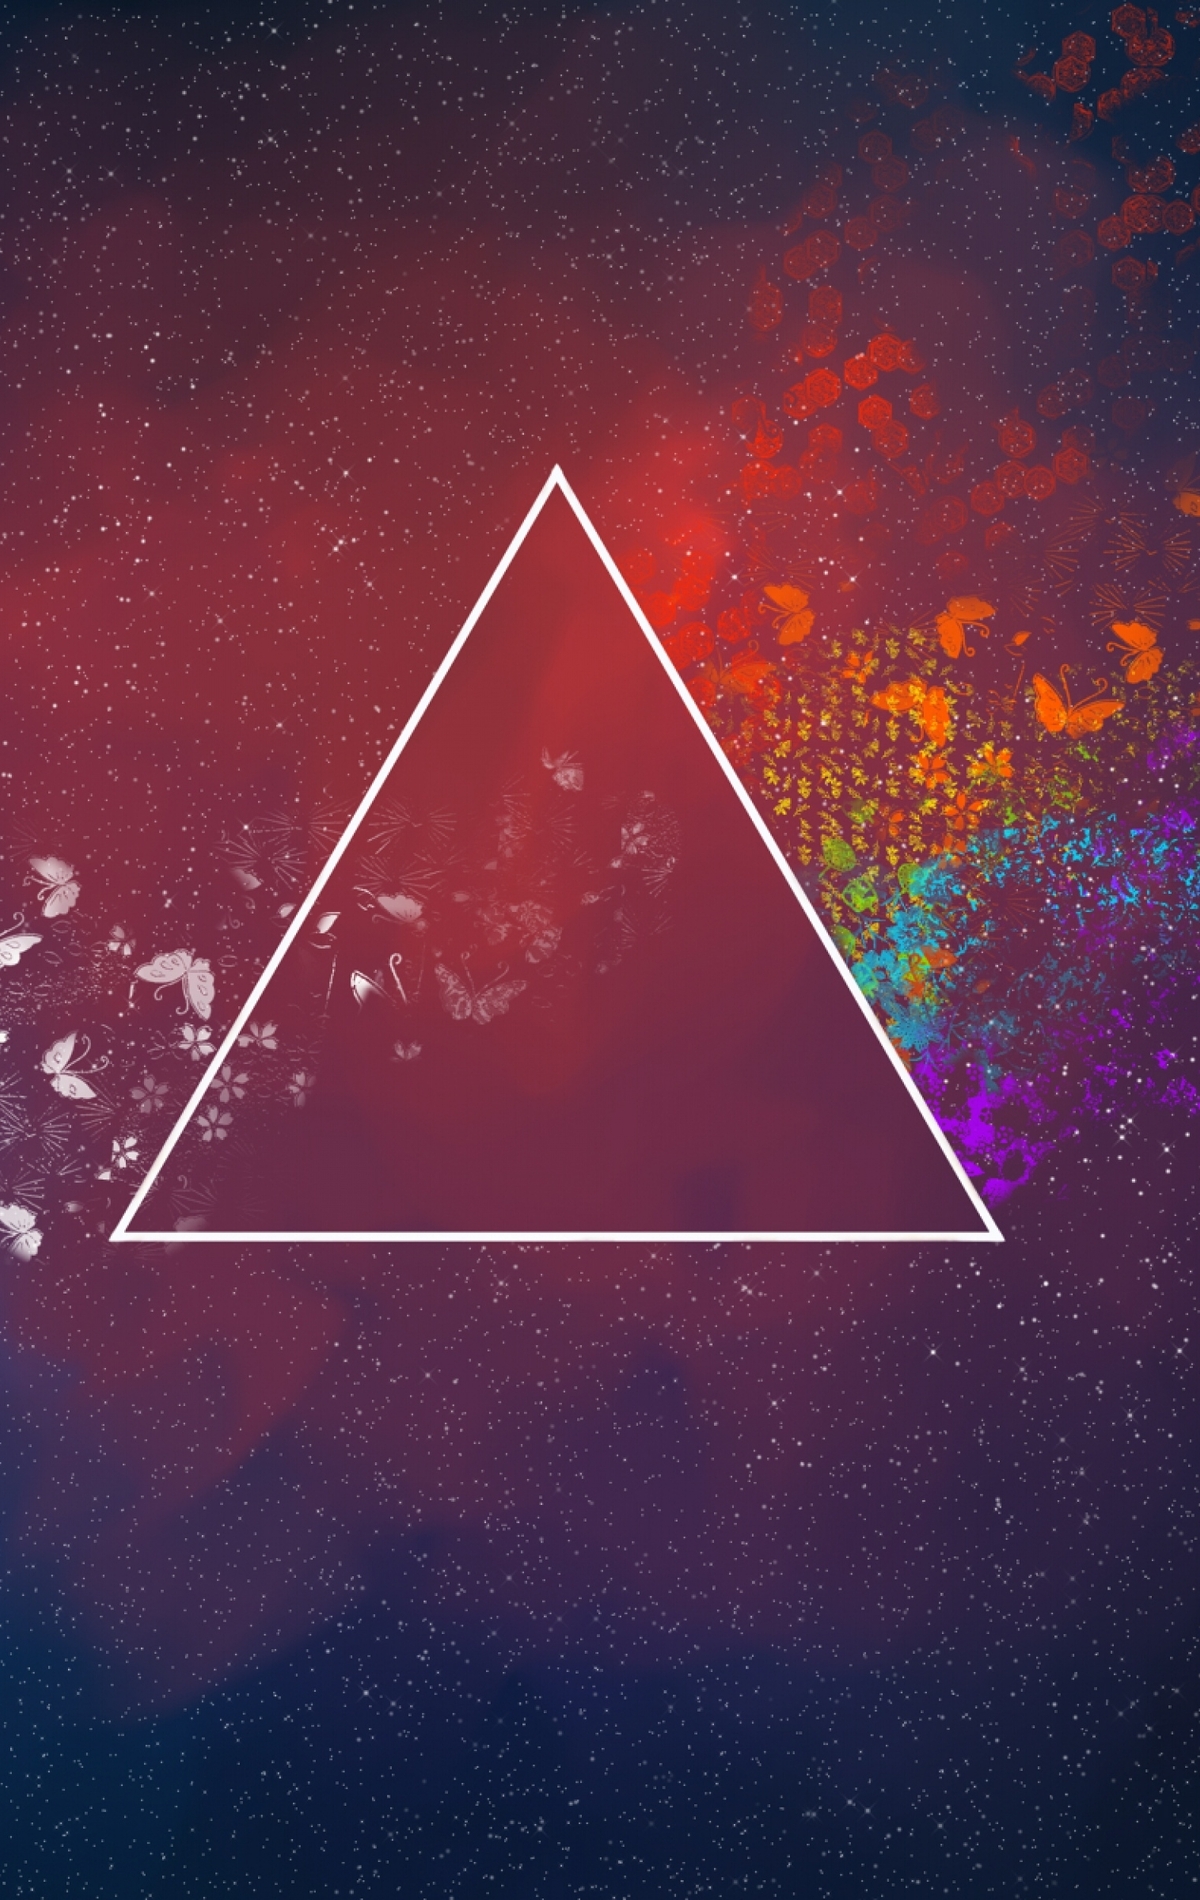 Image: Triangle, angles, butterflies, flowers, stars, paint